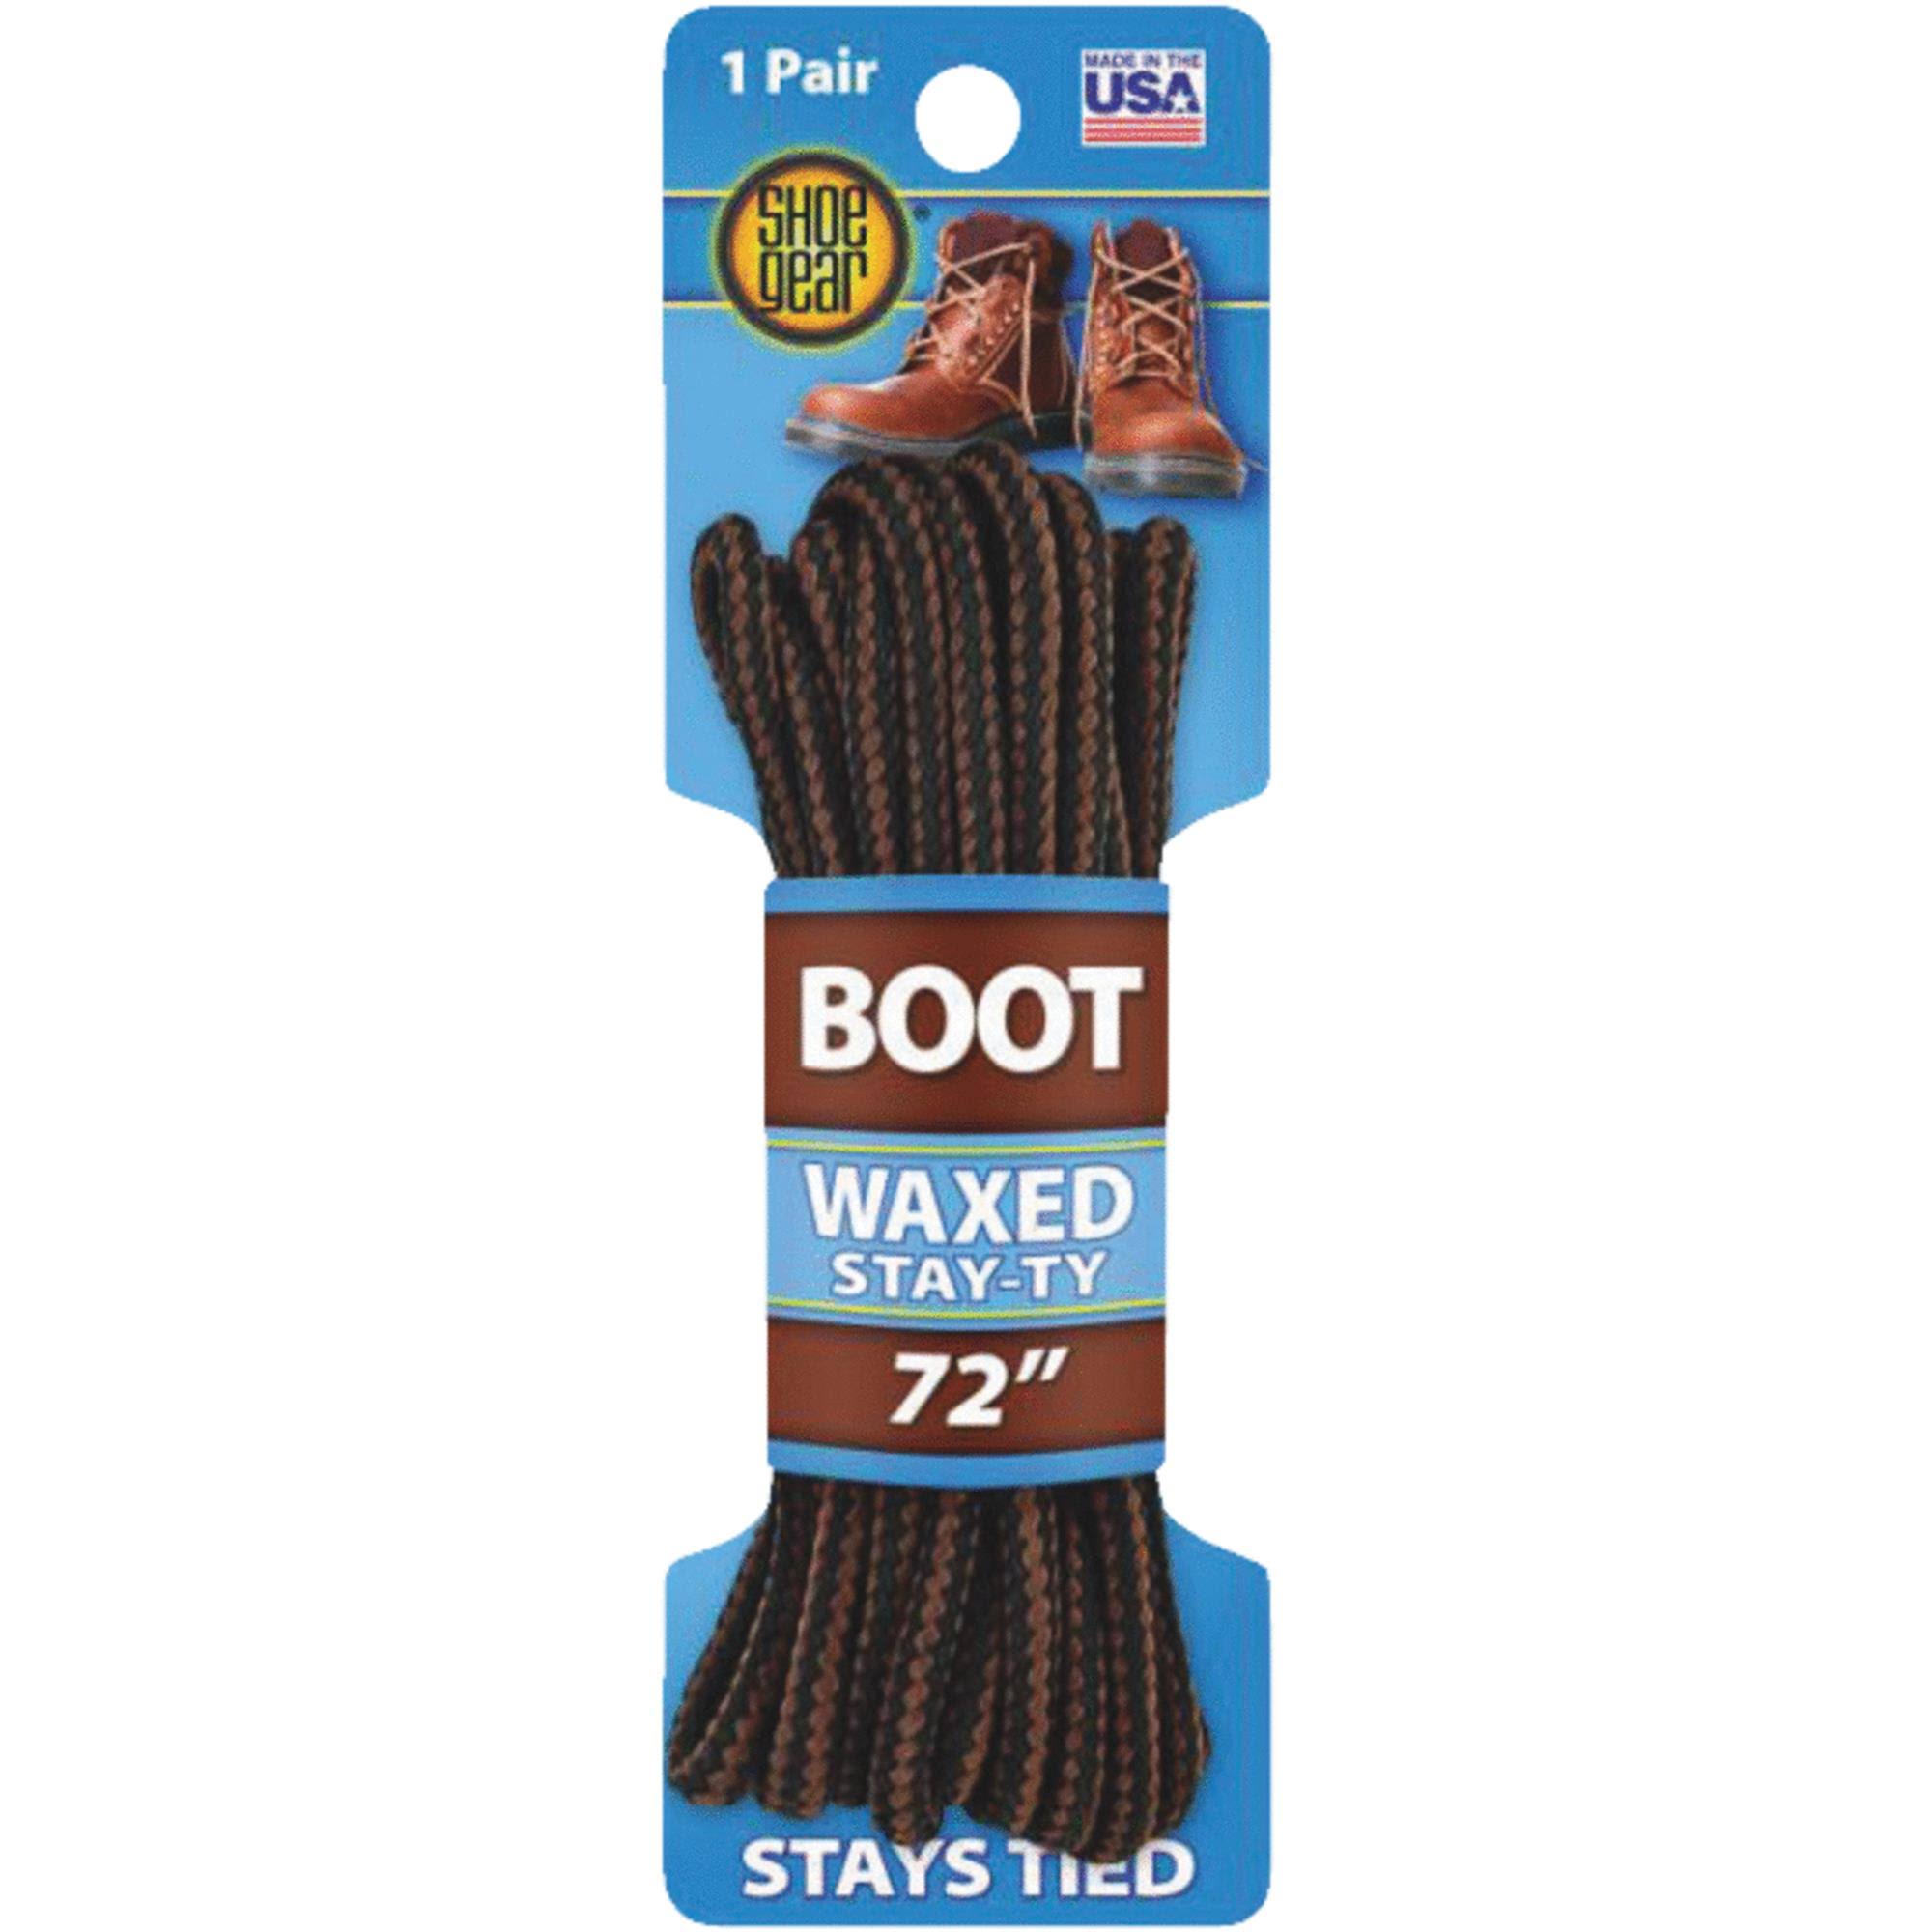 Shoe Gear 375109 Waxed Boot Laces - Brown and Brown, 72"